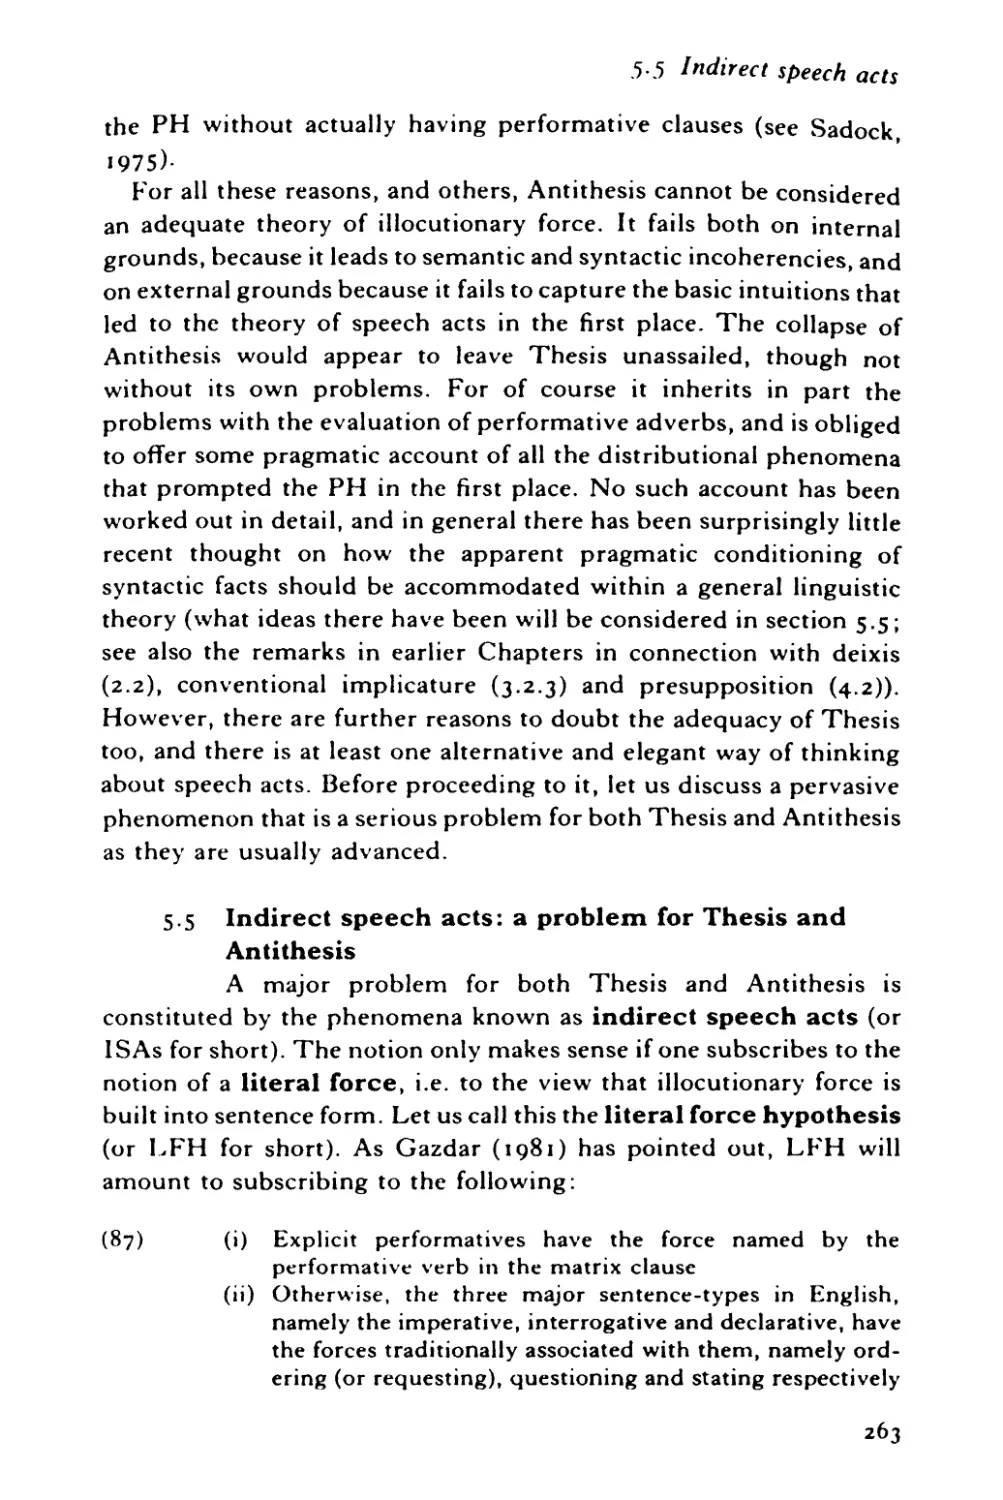 5.5 Indirect speech acts: a problem for Thesis and Antithesis